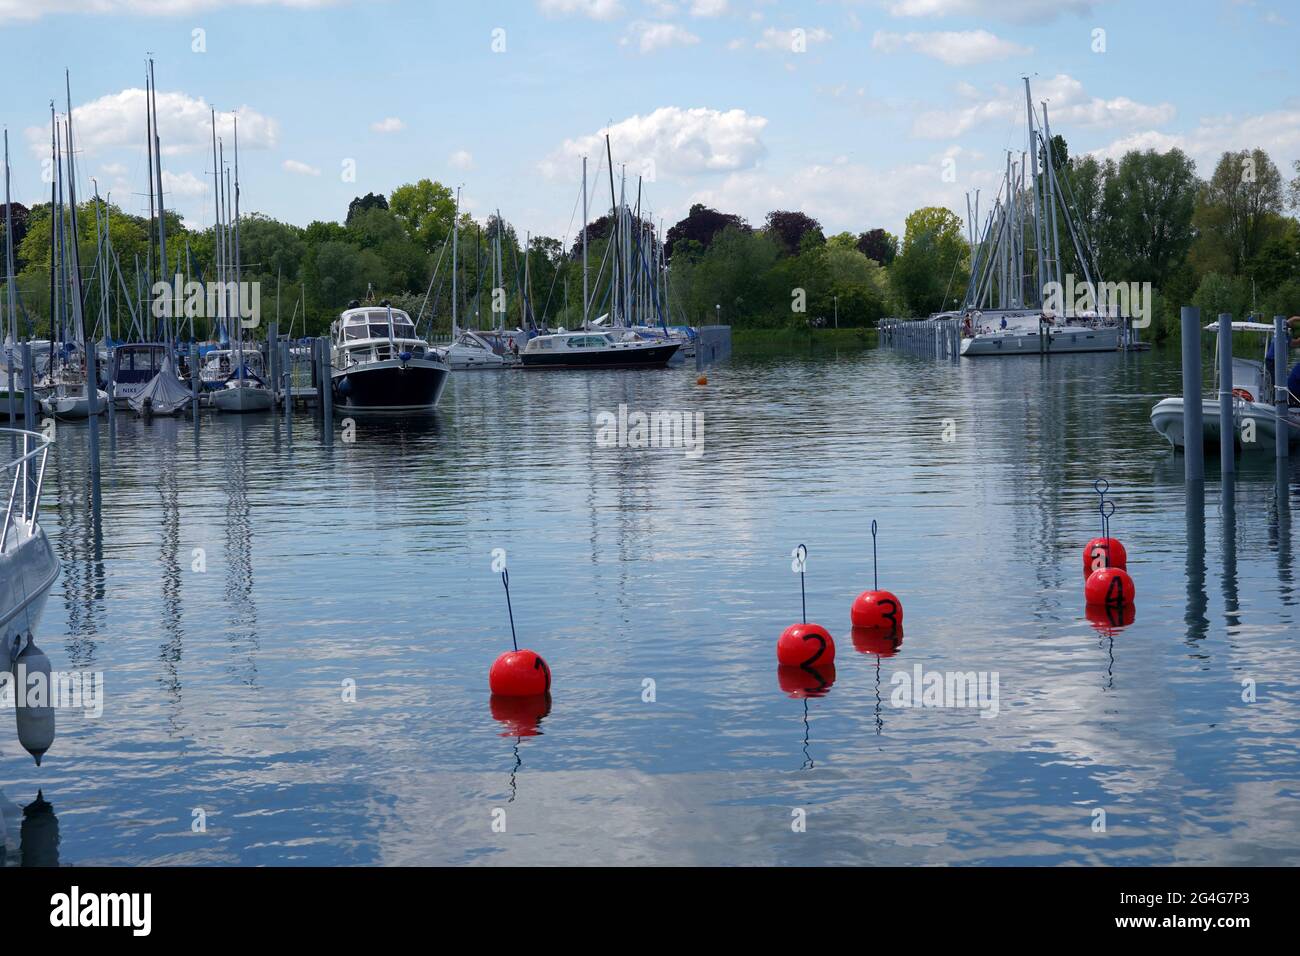 Marina in Kreuzungen with moored boats, sailing vessels and yachts. There are trees on the background and in water there are mooring buoys numbered. Stock Photo